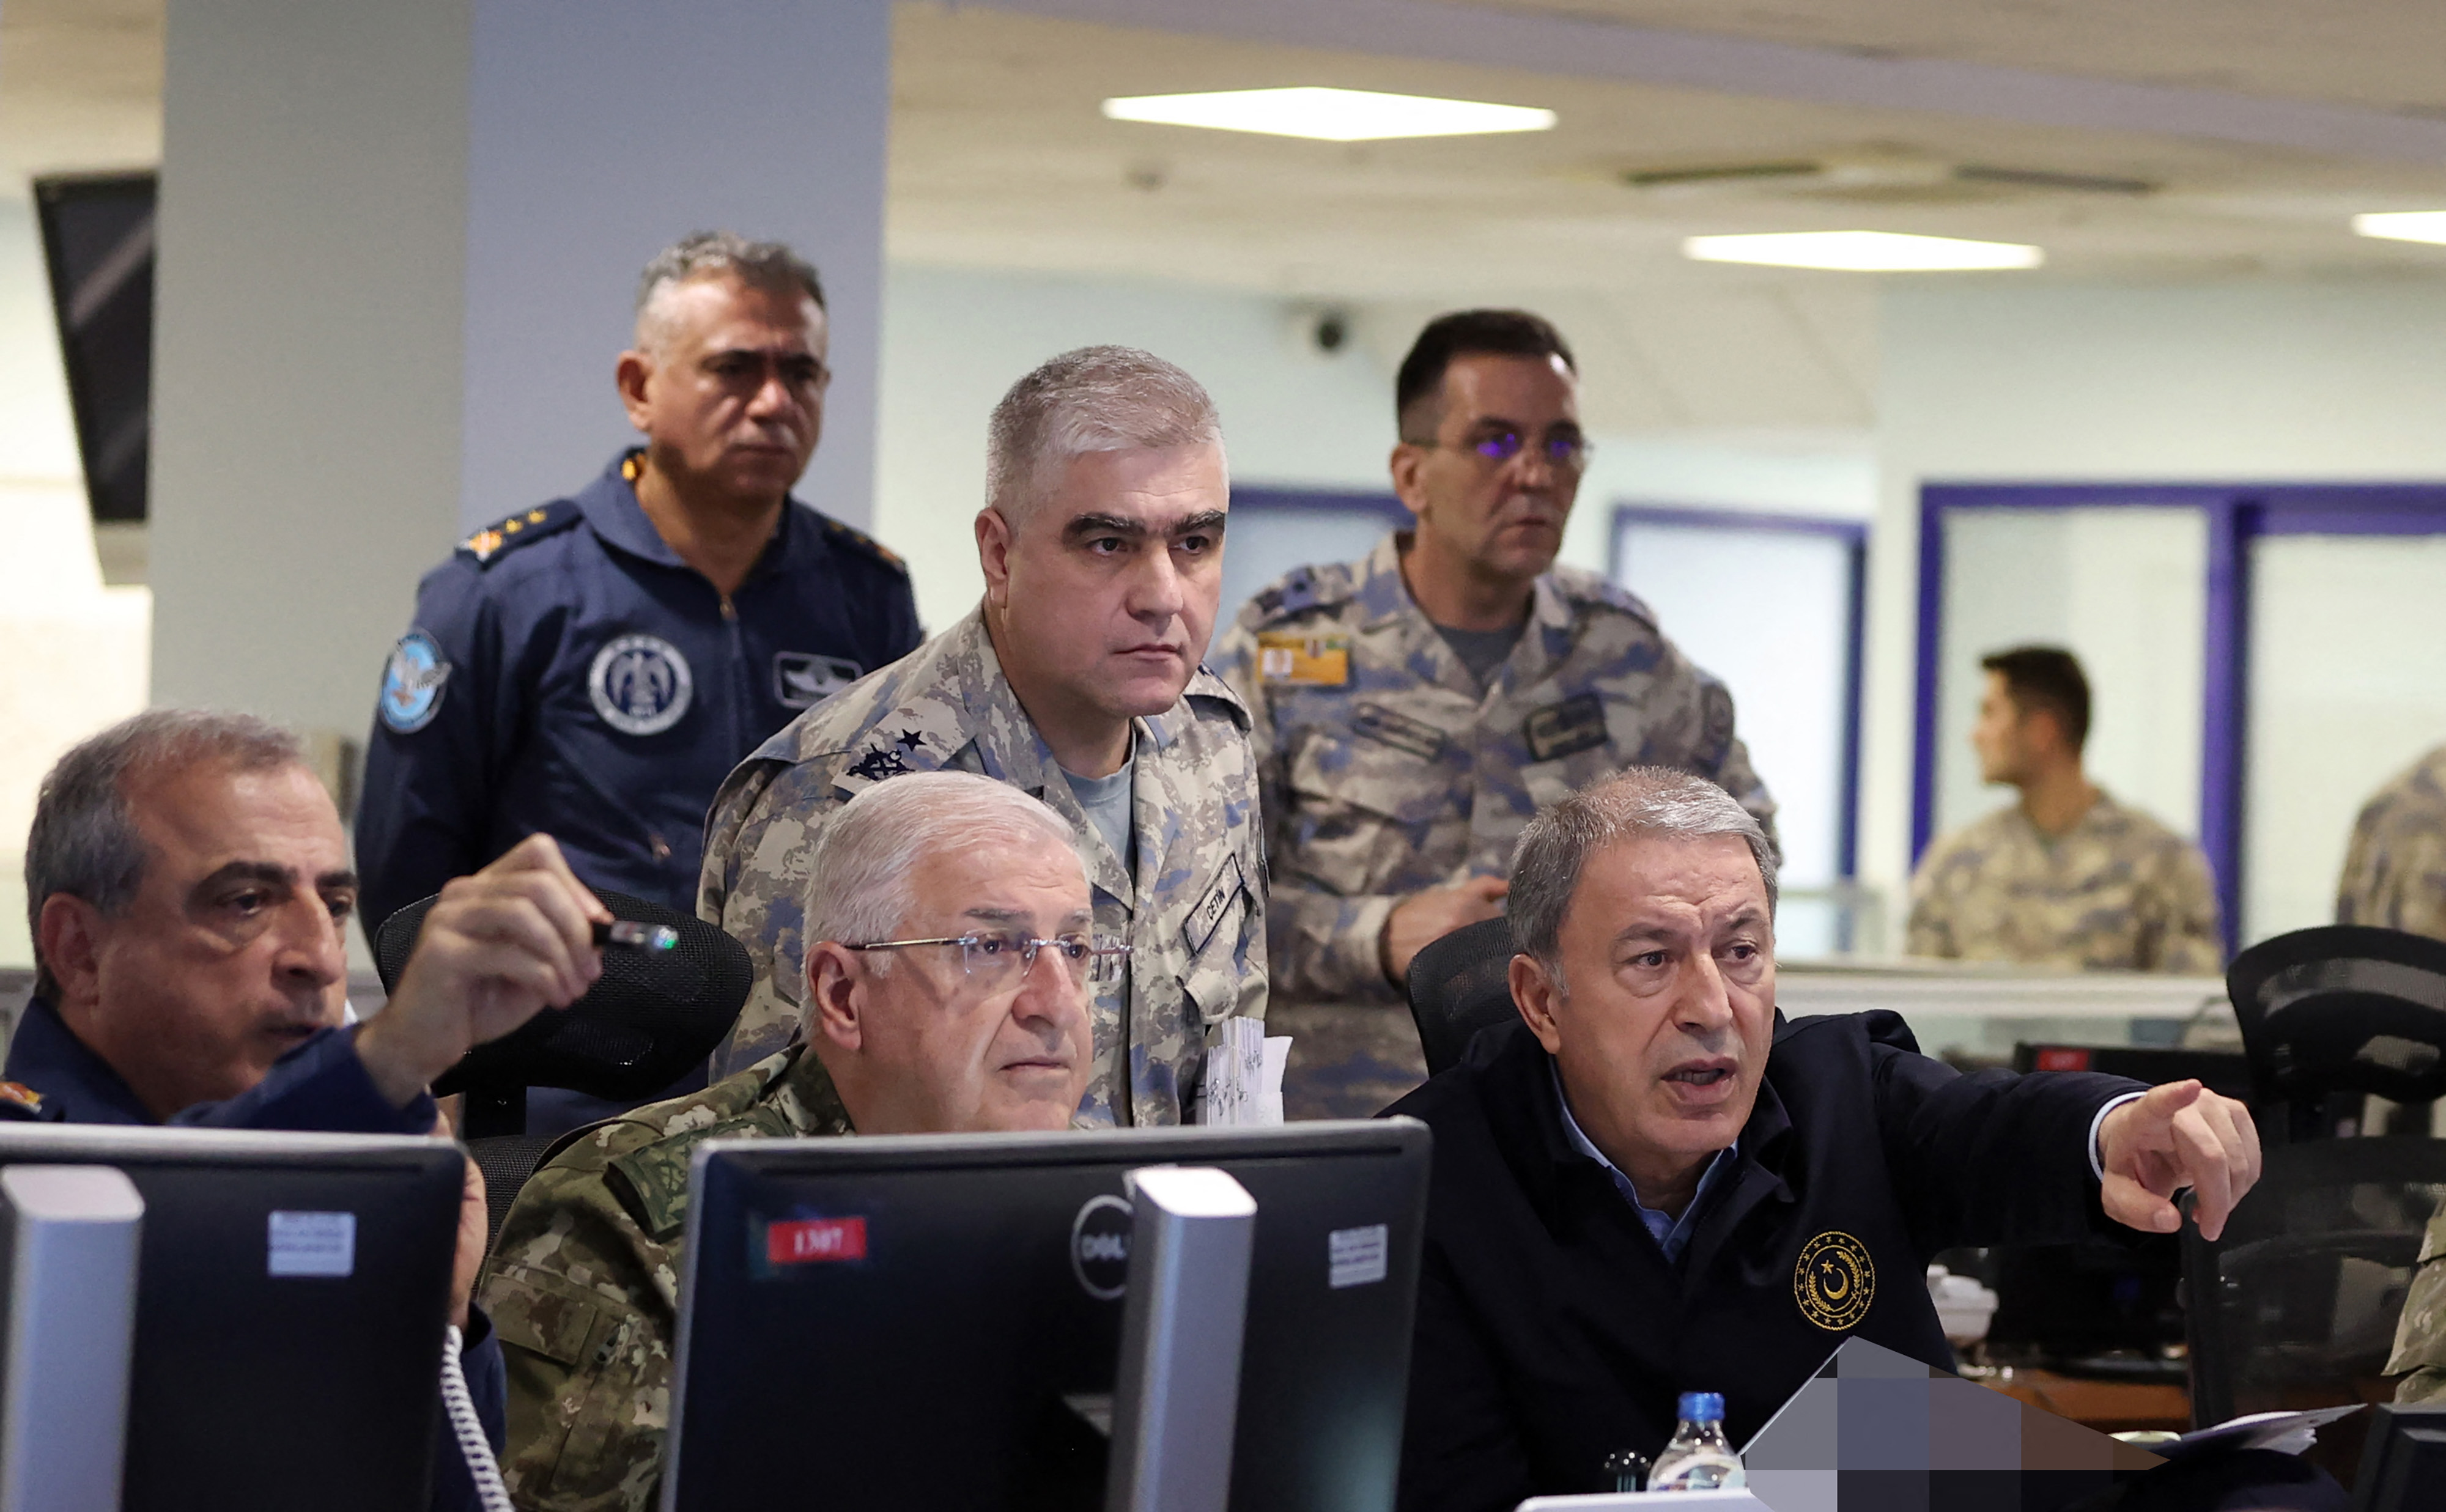 Türkiye's Defence Minister Hulusi Akar (R) chairs the air operation in northern regions of Iraq and Syria with commanders of the Turkish Armed Forces (TSK) at the Turkish Air Force Operations Centre in Ankara.
Press Office of the Ministry of National Defense of Türkiye / AFP